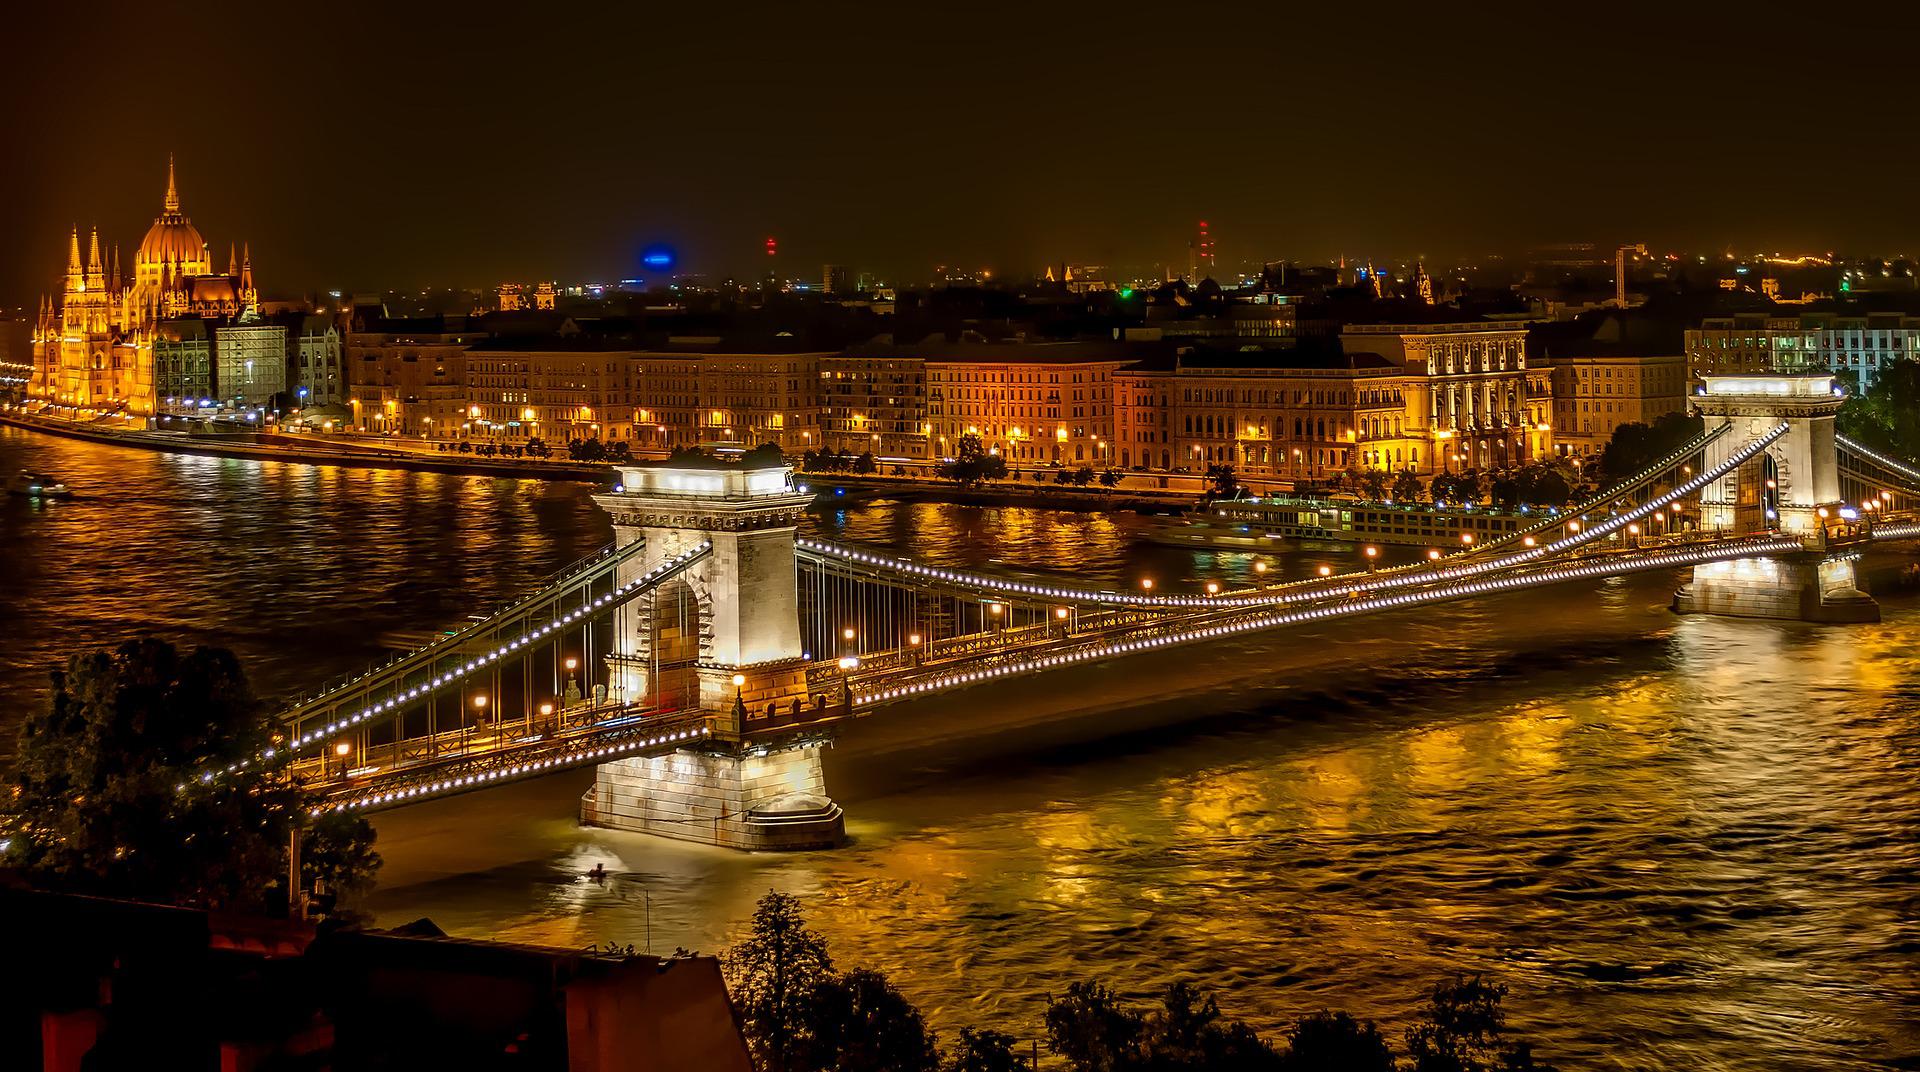 Budapest Chain Bridge over the Danube at night with the Parliament building in the background